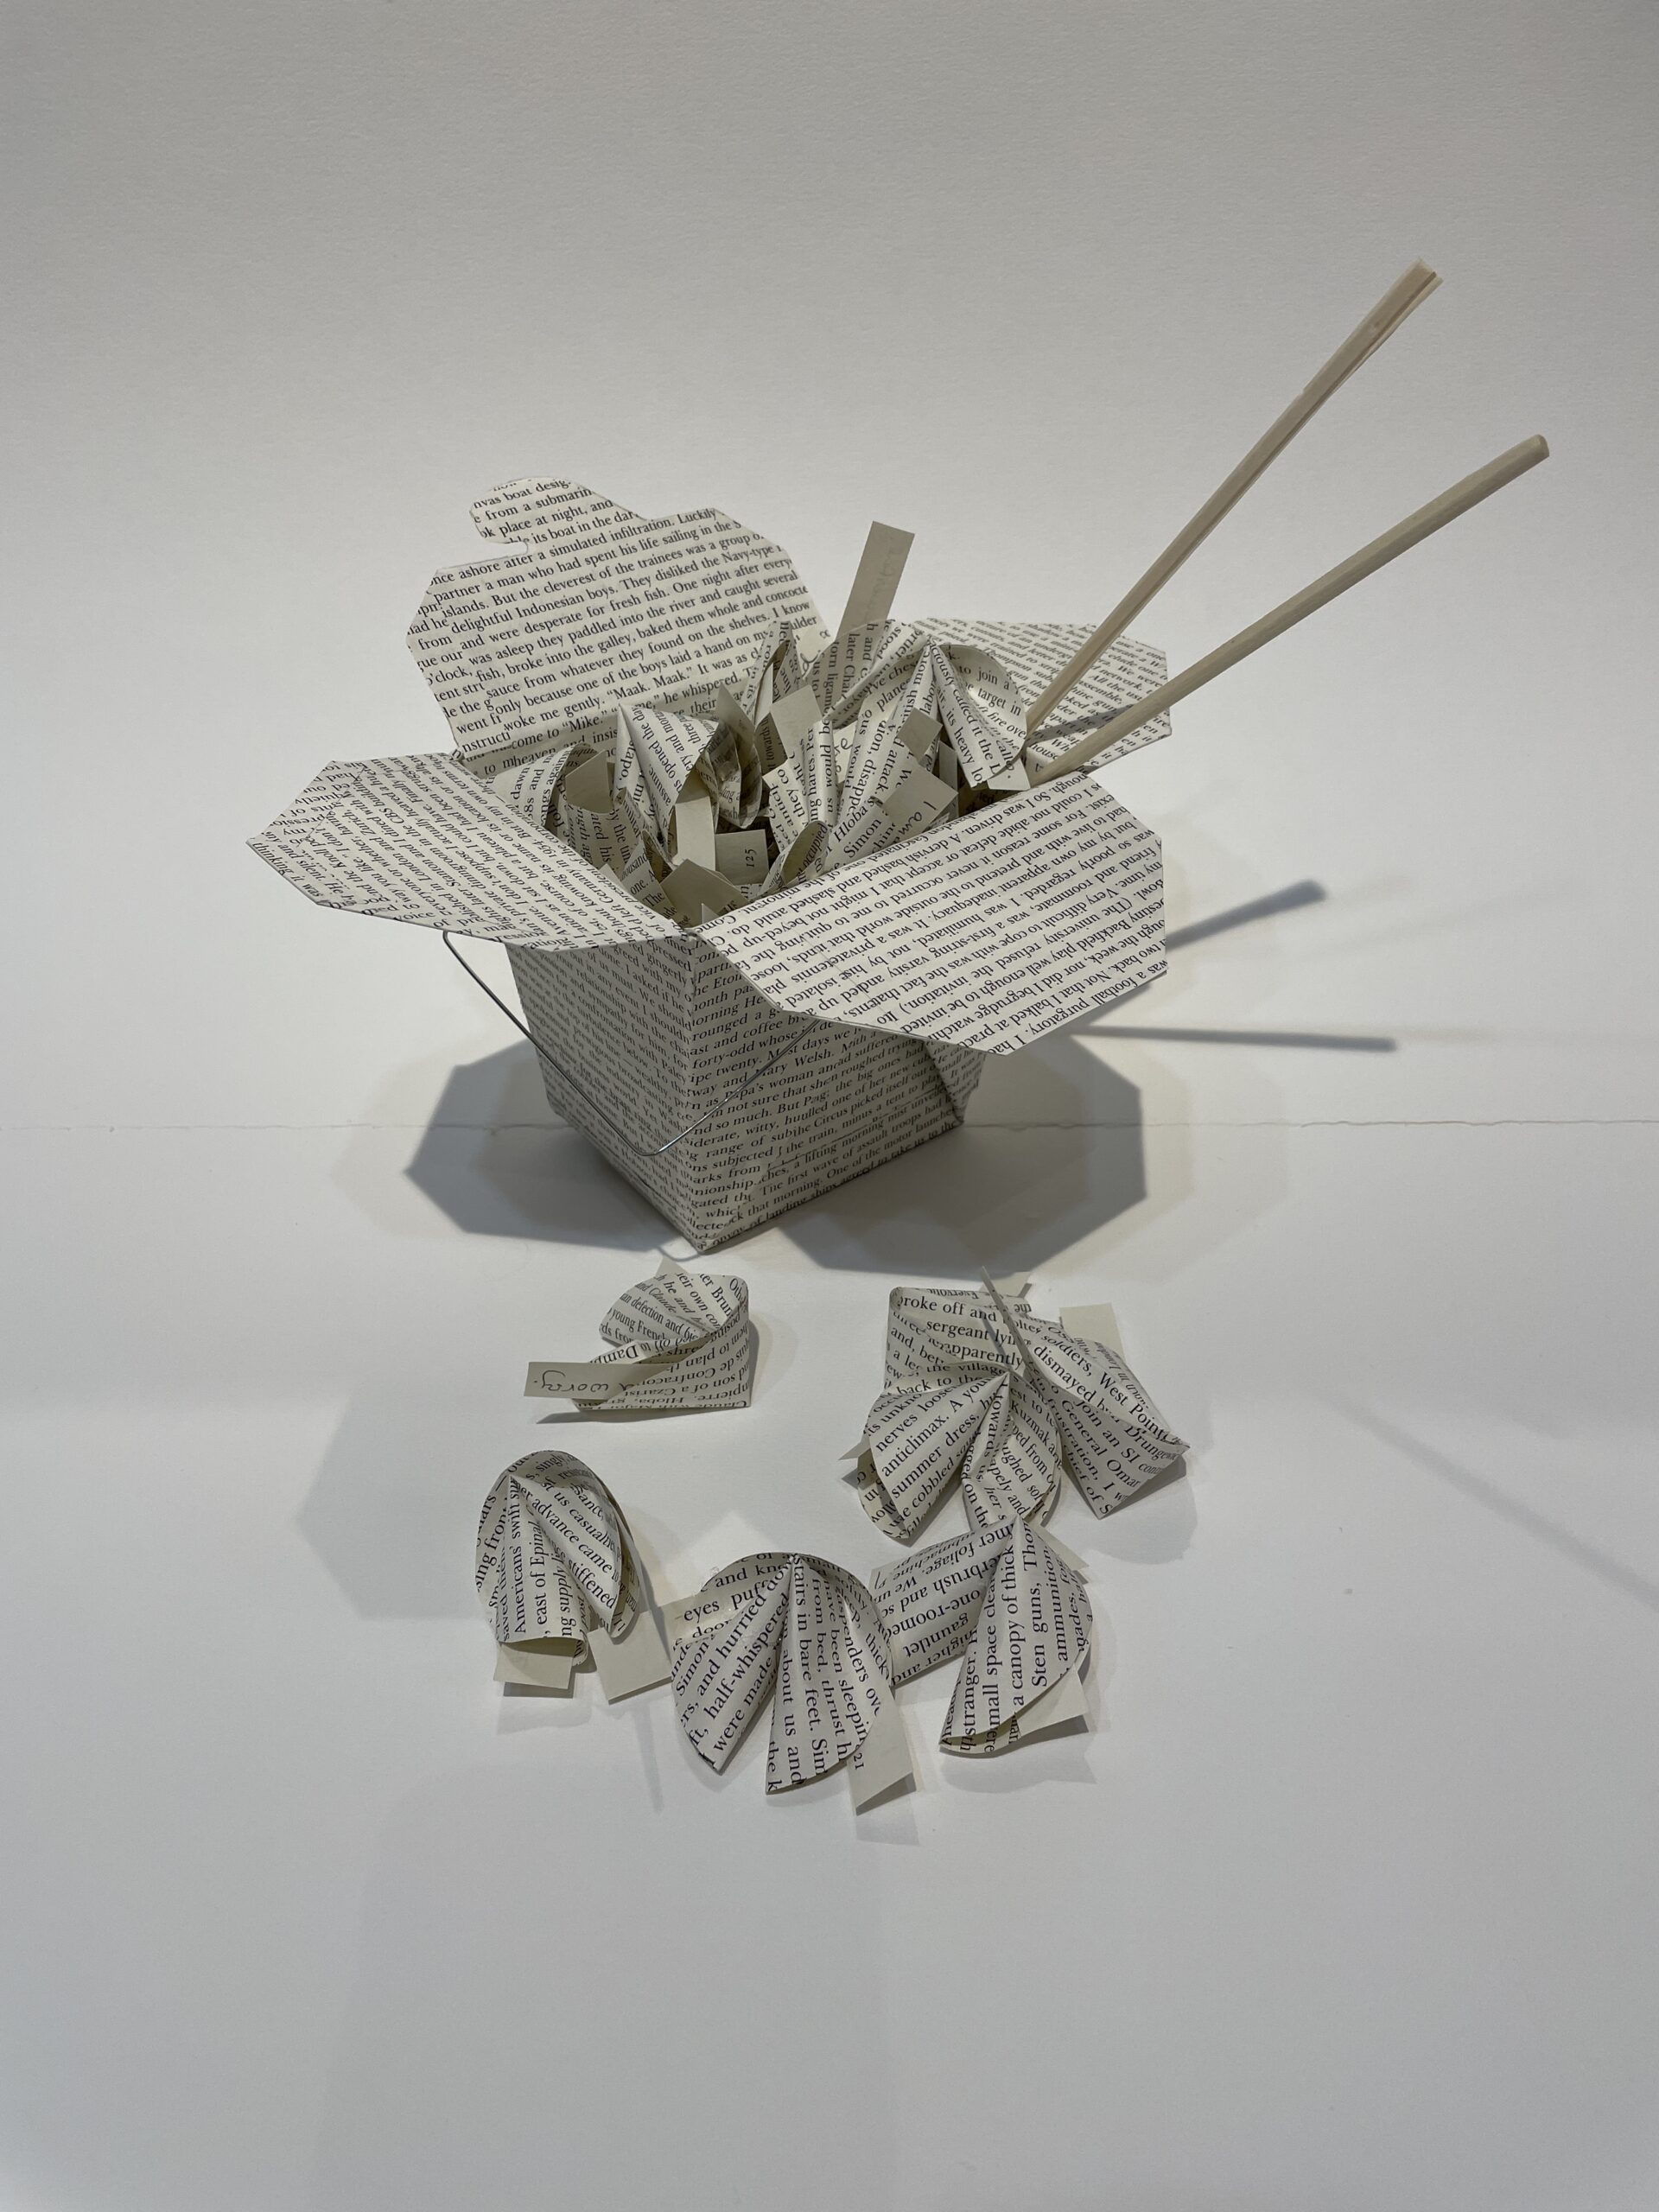 An artwork by Maggie Kerrigan that shows fortune cookies made from the paper of a book.